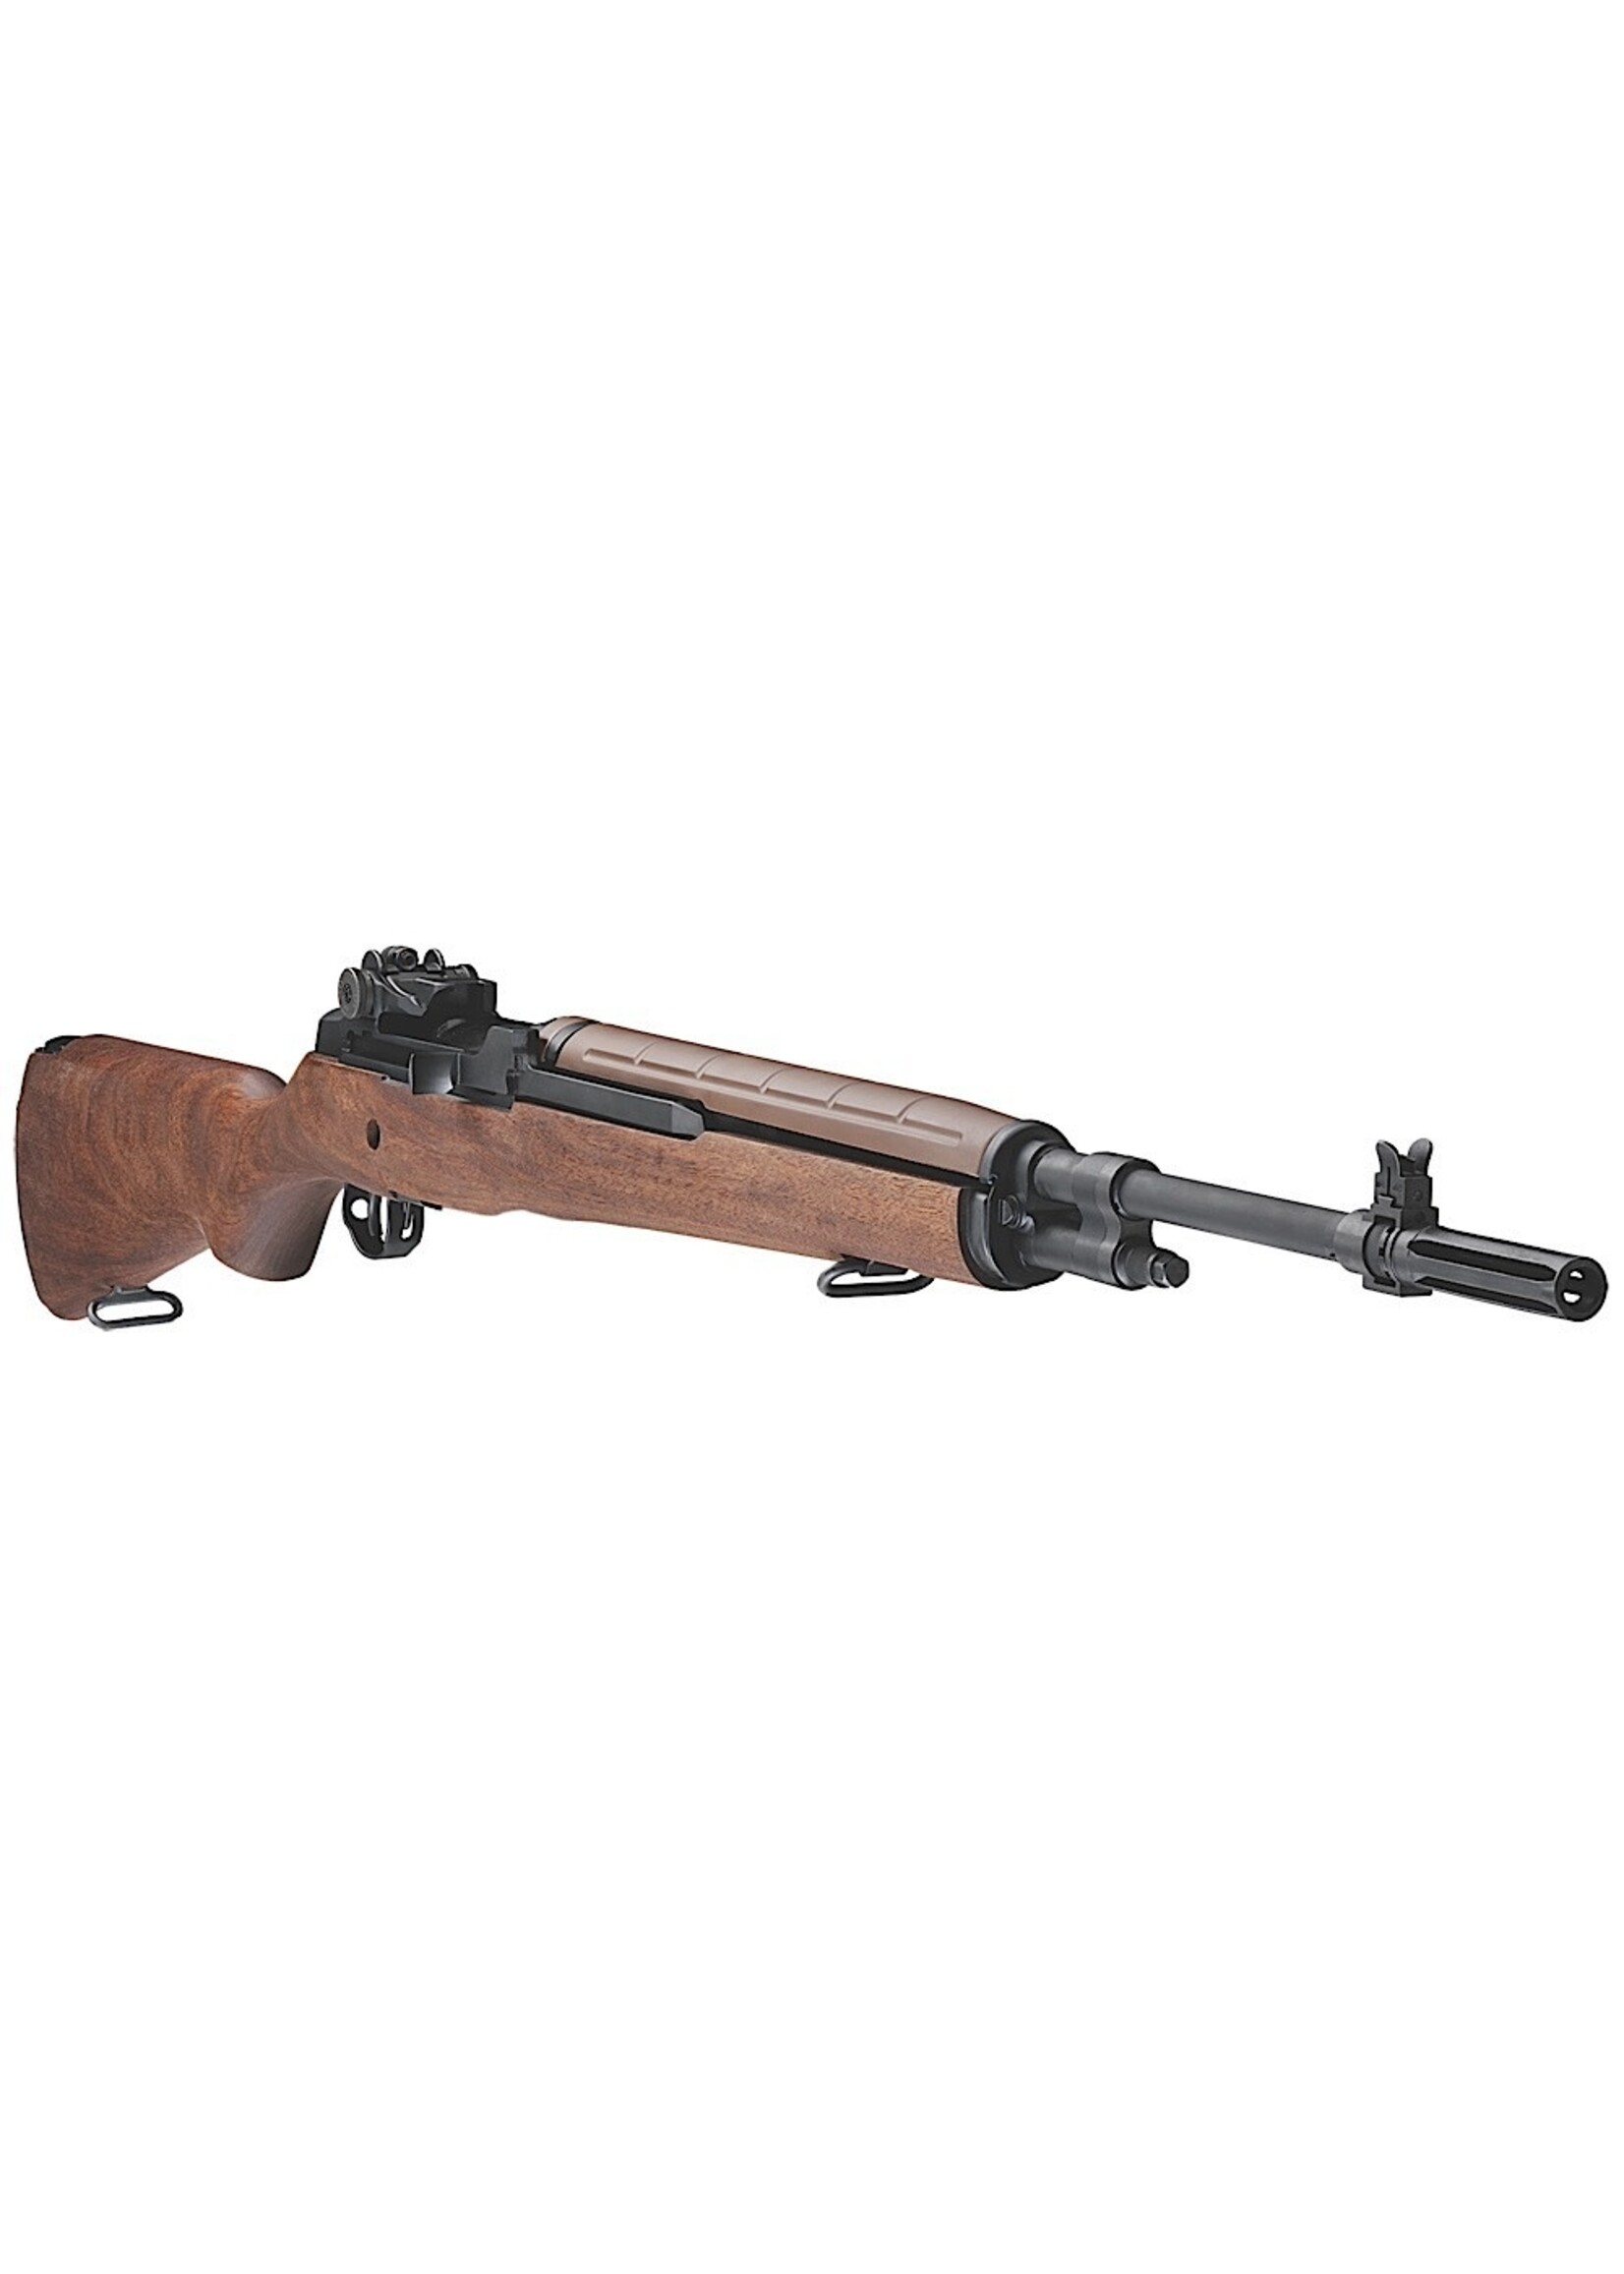 Springfield Armory Springfield Armory MA9102 M1A Standard Issue 308 Win 10+1 22" Carbon Steel Barrel w/Flash Suppressor, Black Parkerized Receiver, Two-Stage Military Trigger, Walnut Stock